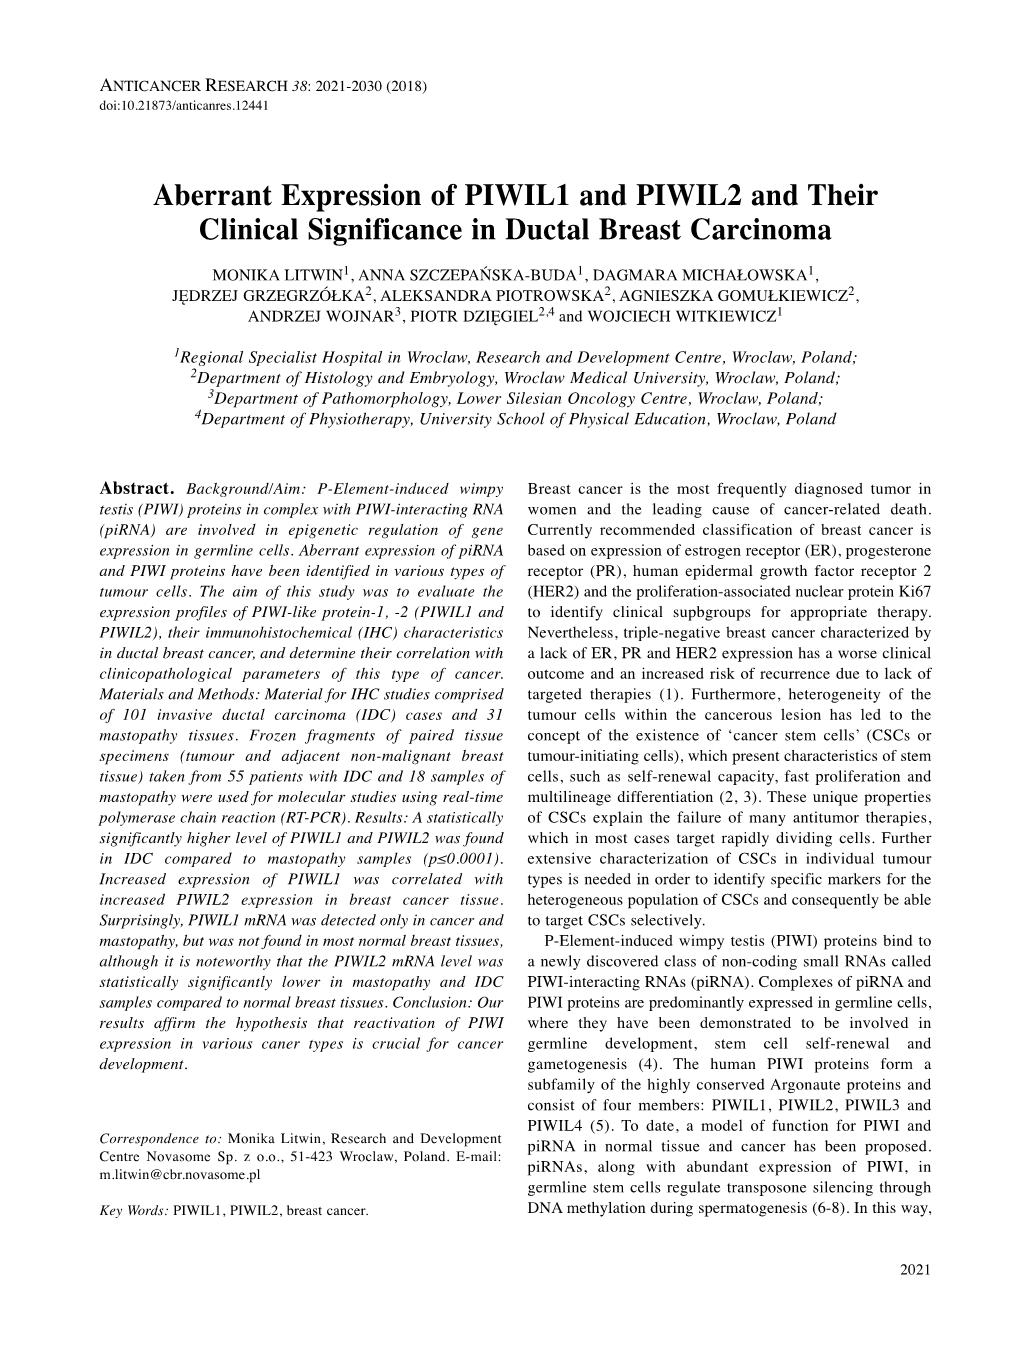 Aberrant Expression of PIWIL1 and PIWIL2 and Their Clinical